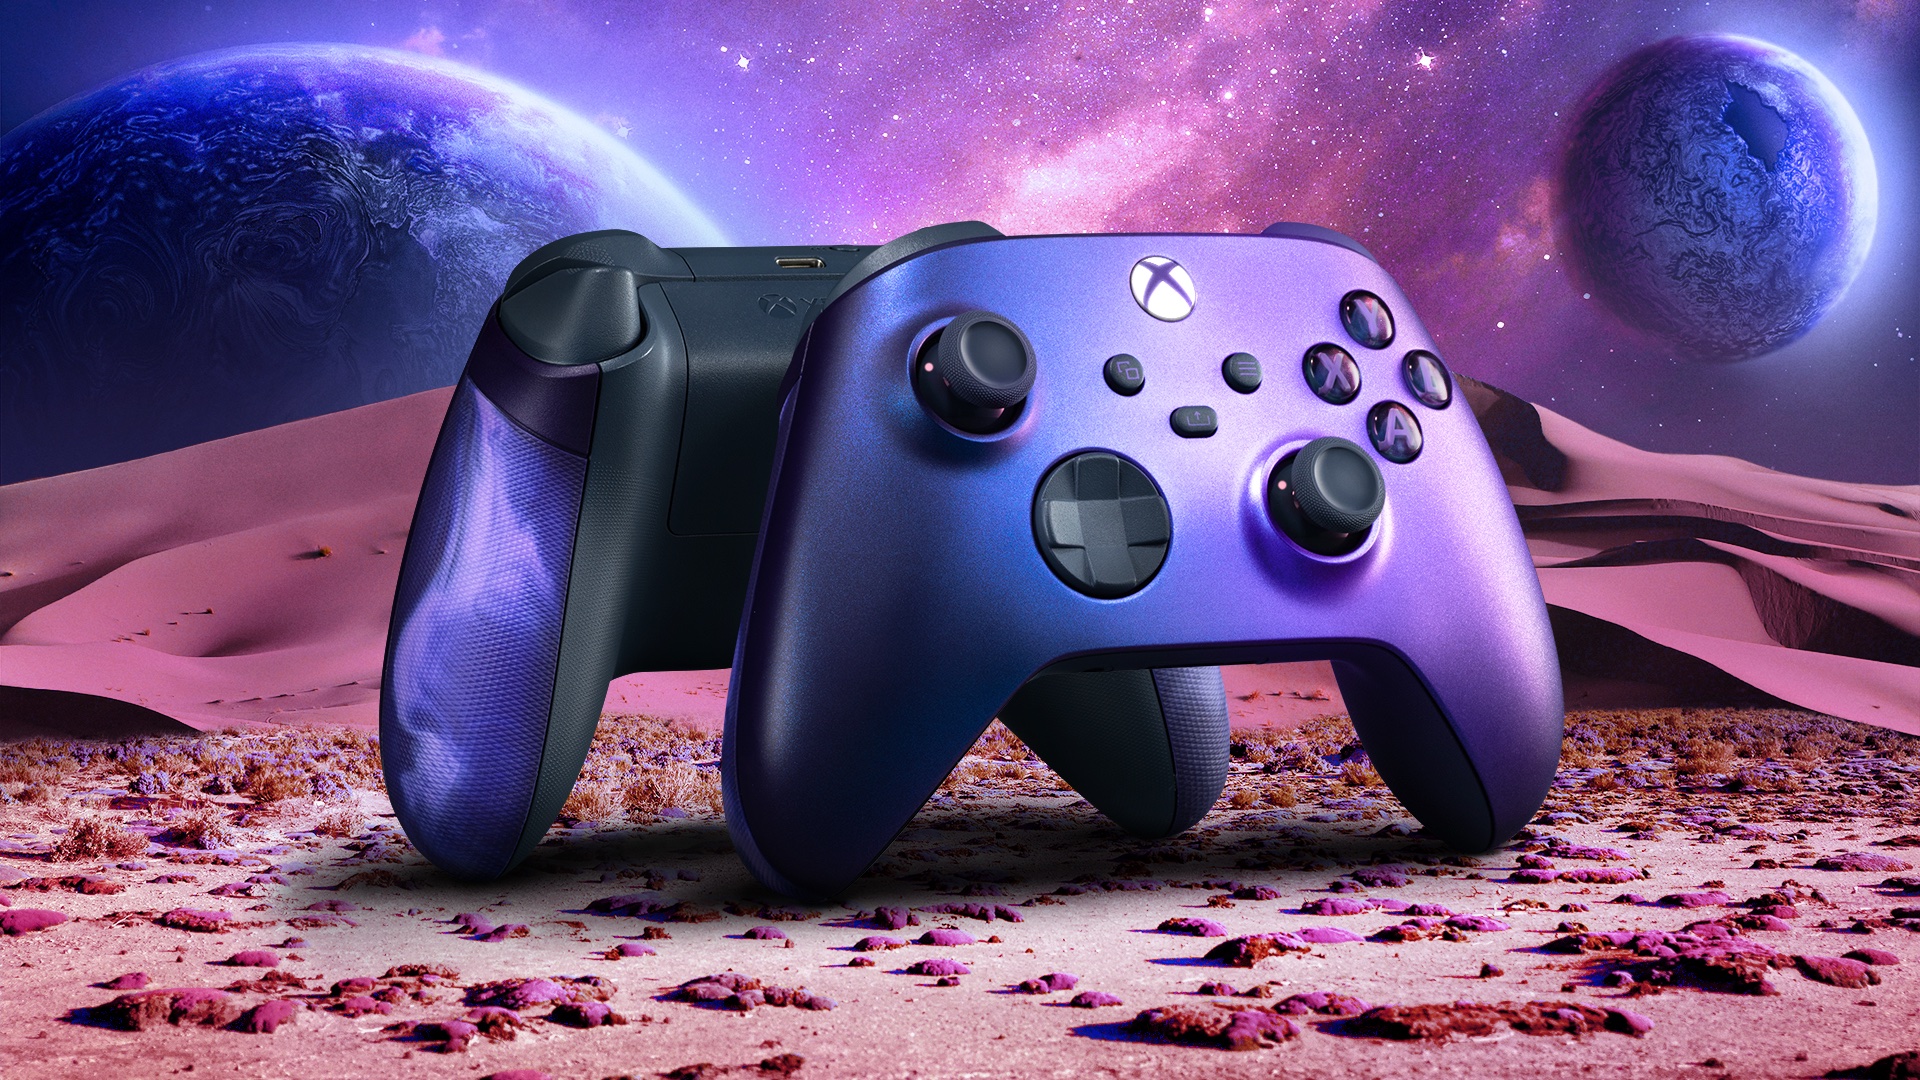 Travel through space with the new Xbox Wireless Controller - Stellar Shift Special Edition, available now